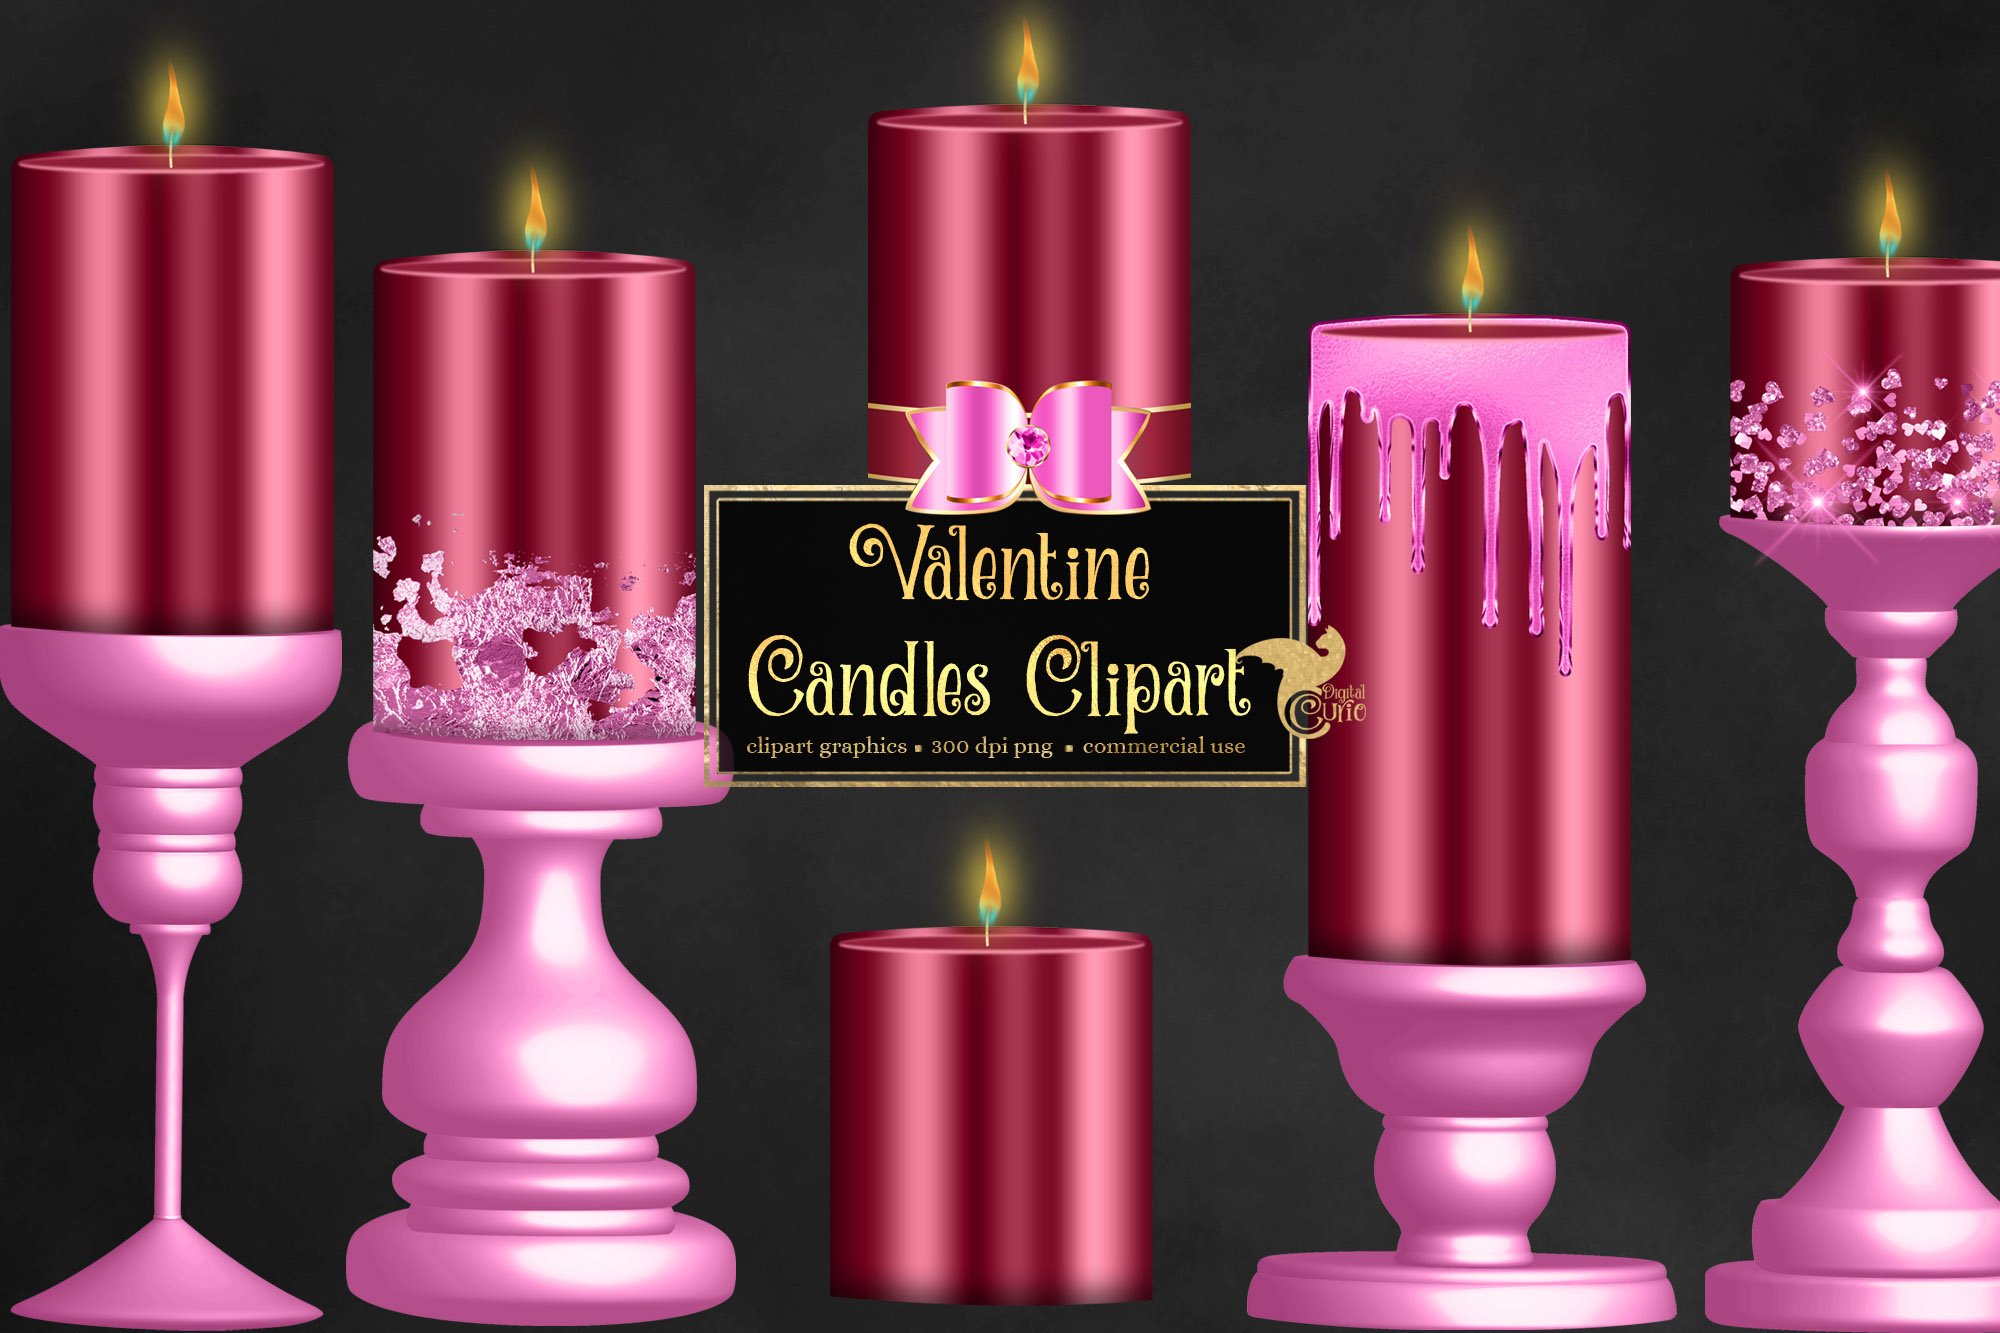 Valentine Candles Clipart cover image.